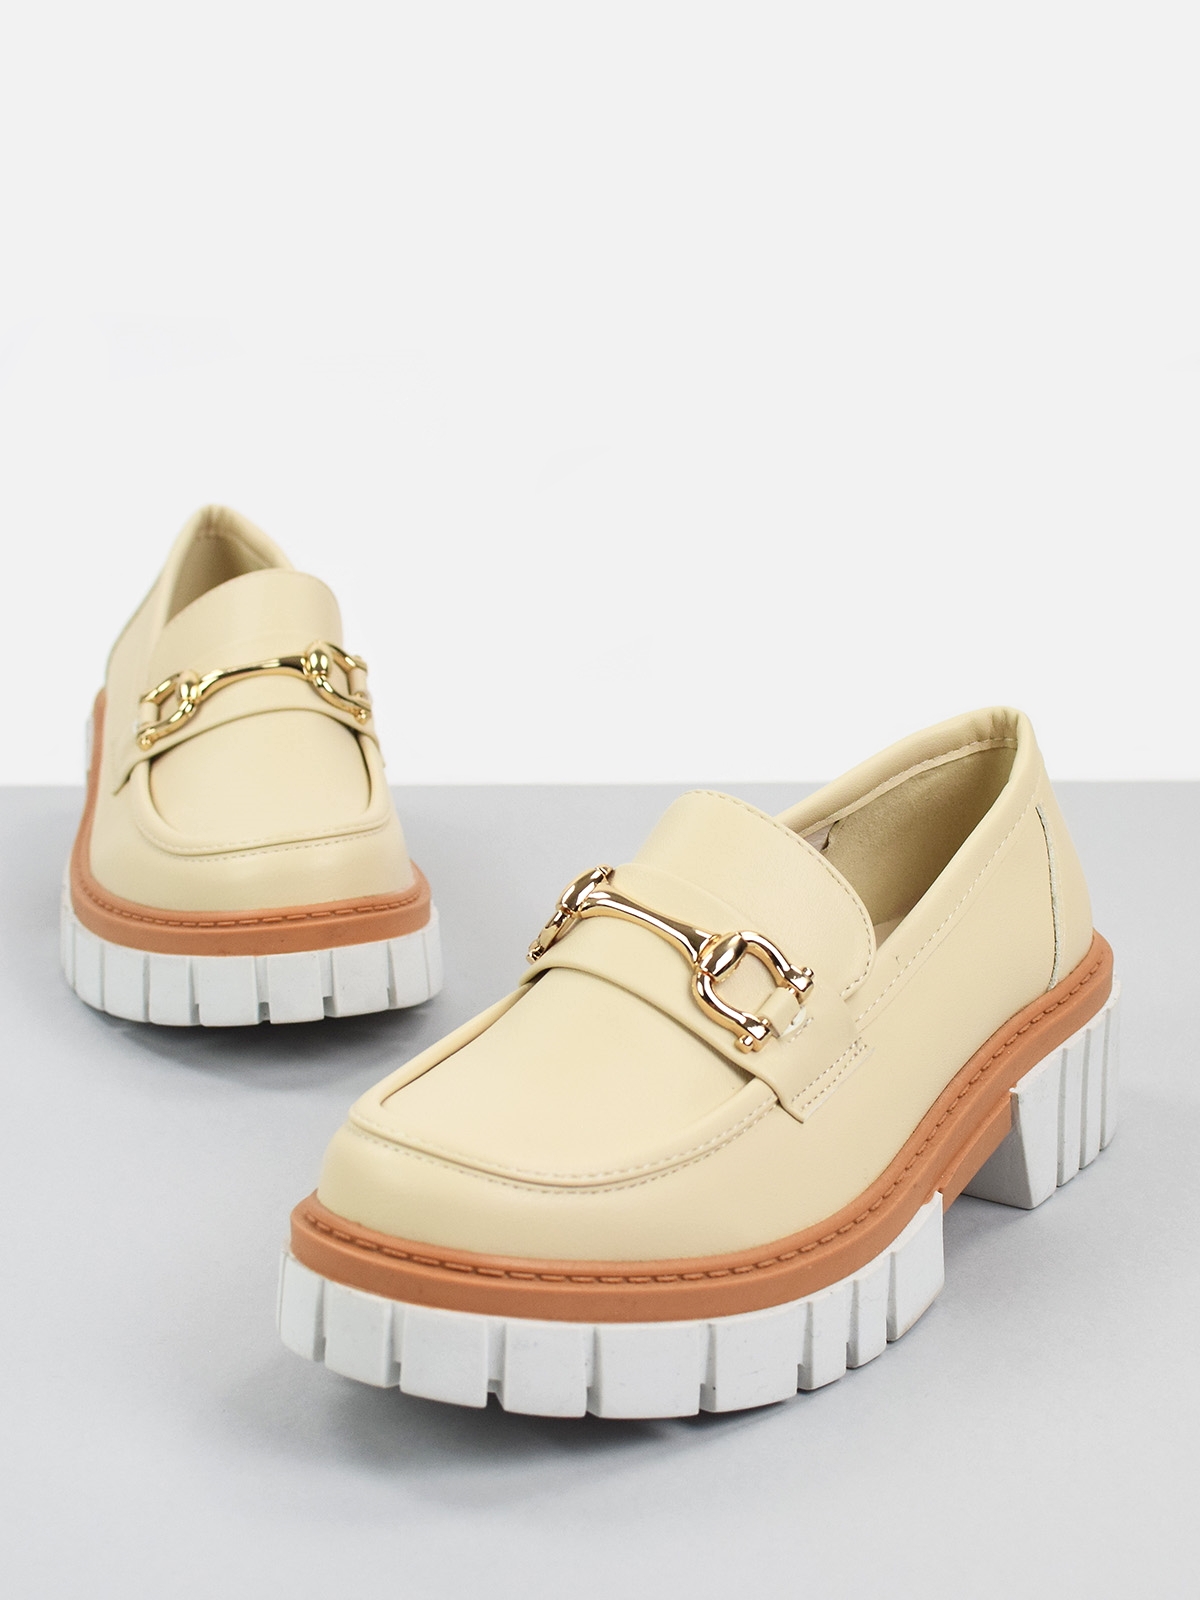 Chunky loafers with front gold trim in neutral color